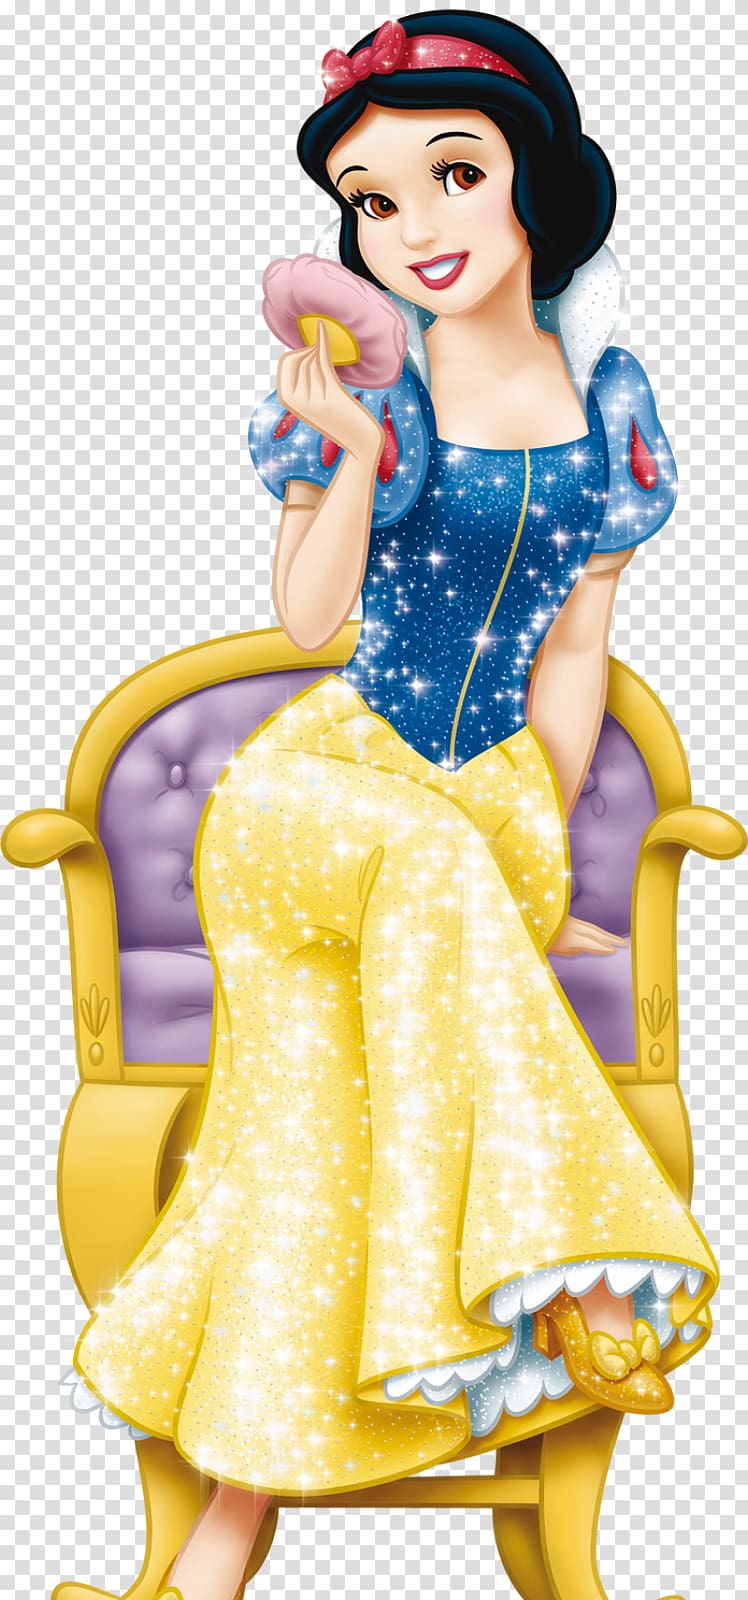 Minnie Mouse Mickey Mouse Snow White and the Seven Dwarfs Disney Princess, princess jasmine transparent background PNG clipart